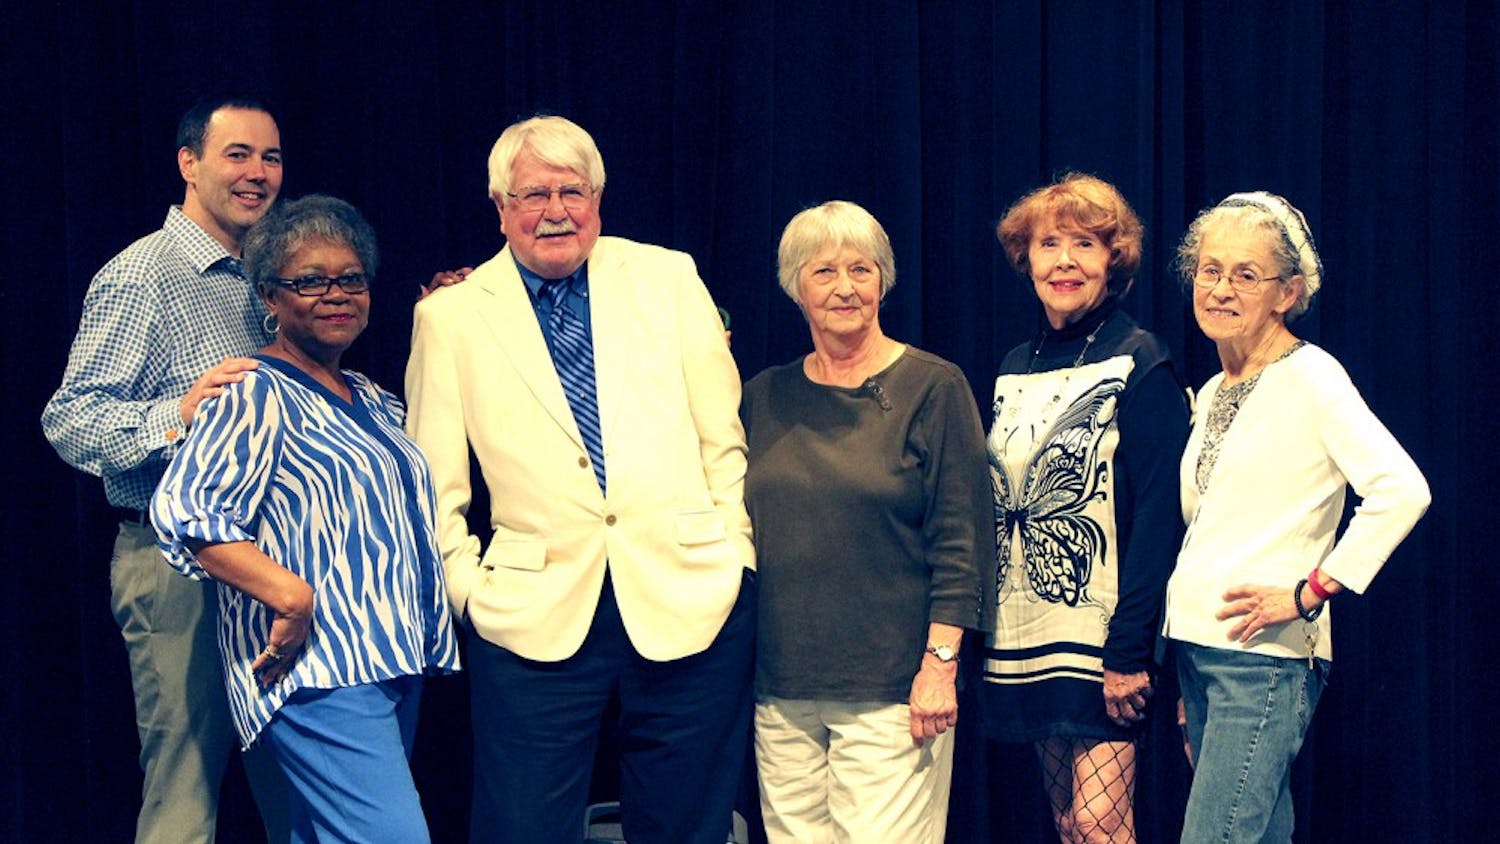 Participants in the Fashion Show at the Seymour Senior Center pose for a picture after a dress rehearsal.